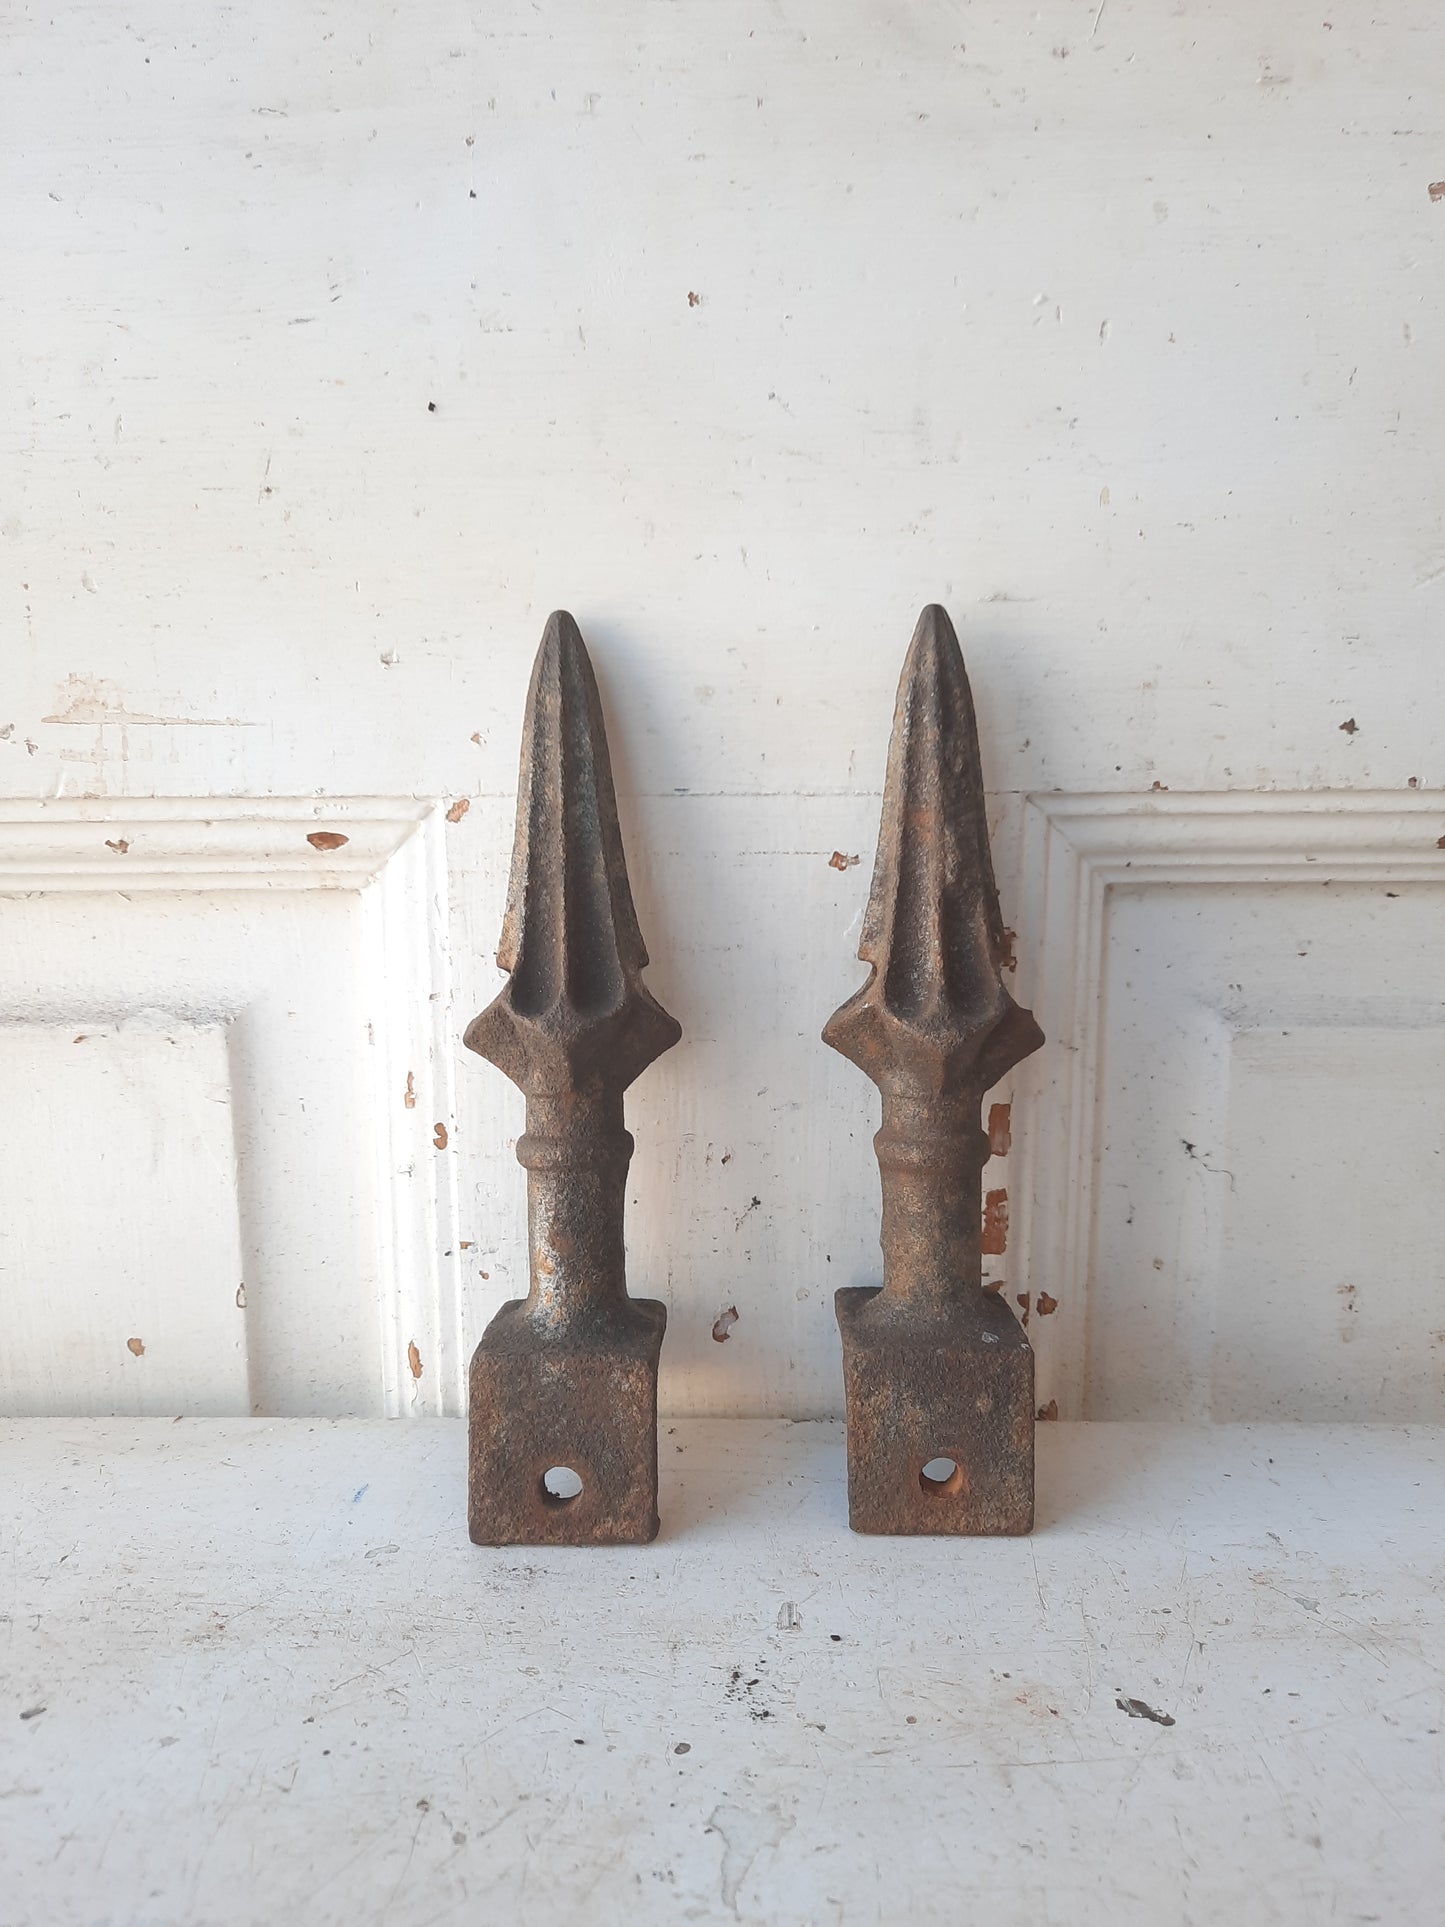 Small Pair of Antique Cast Iron Fence Post Finial, Iron Fence Spear Point Topper